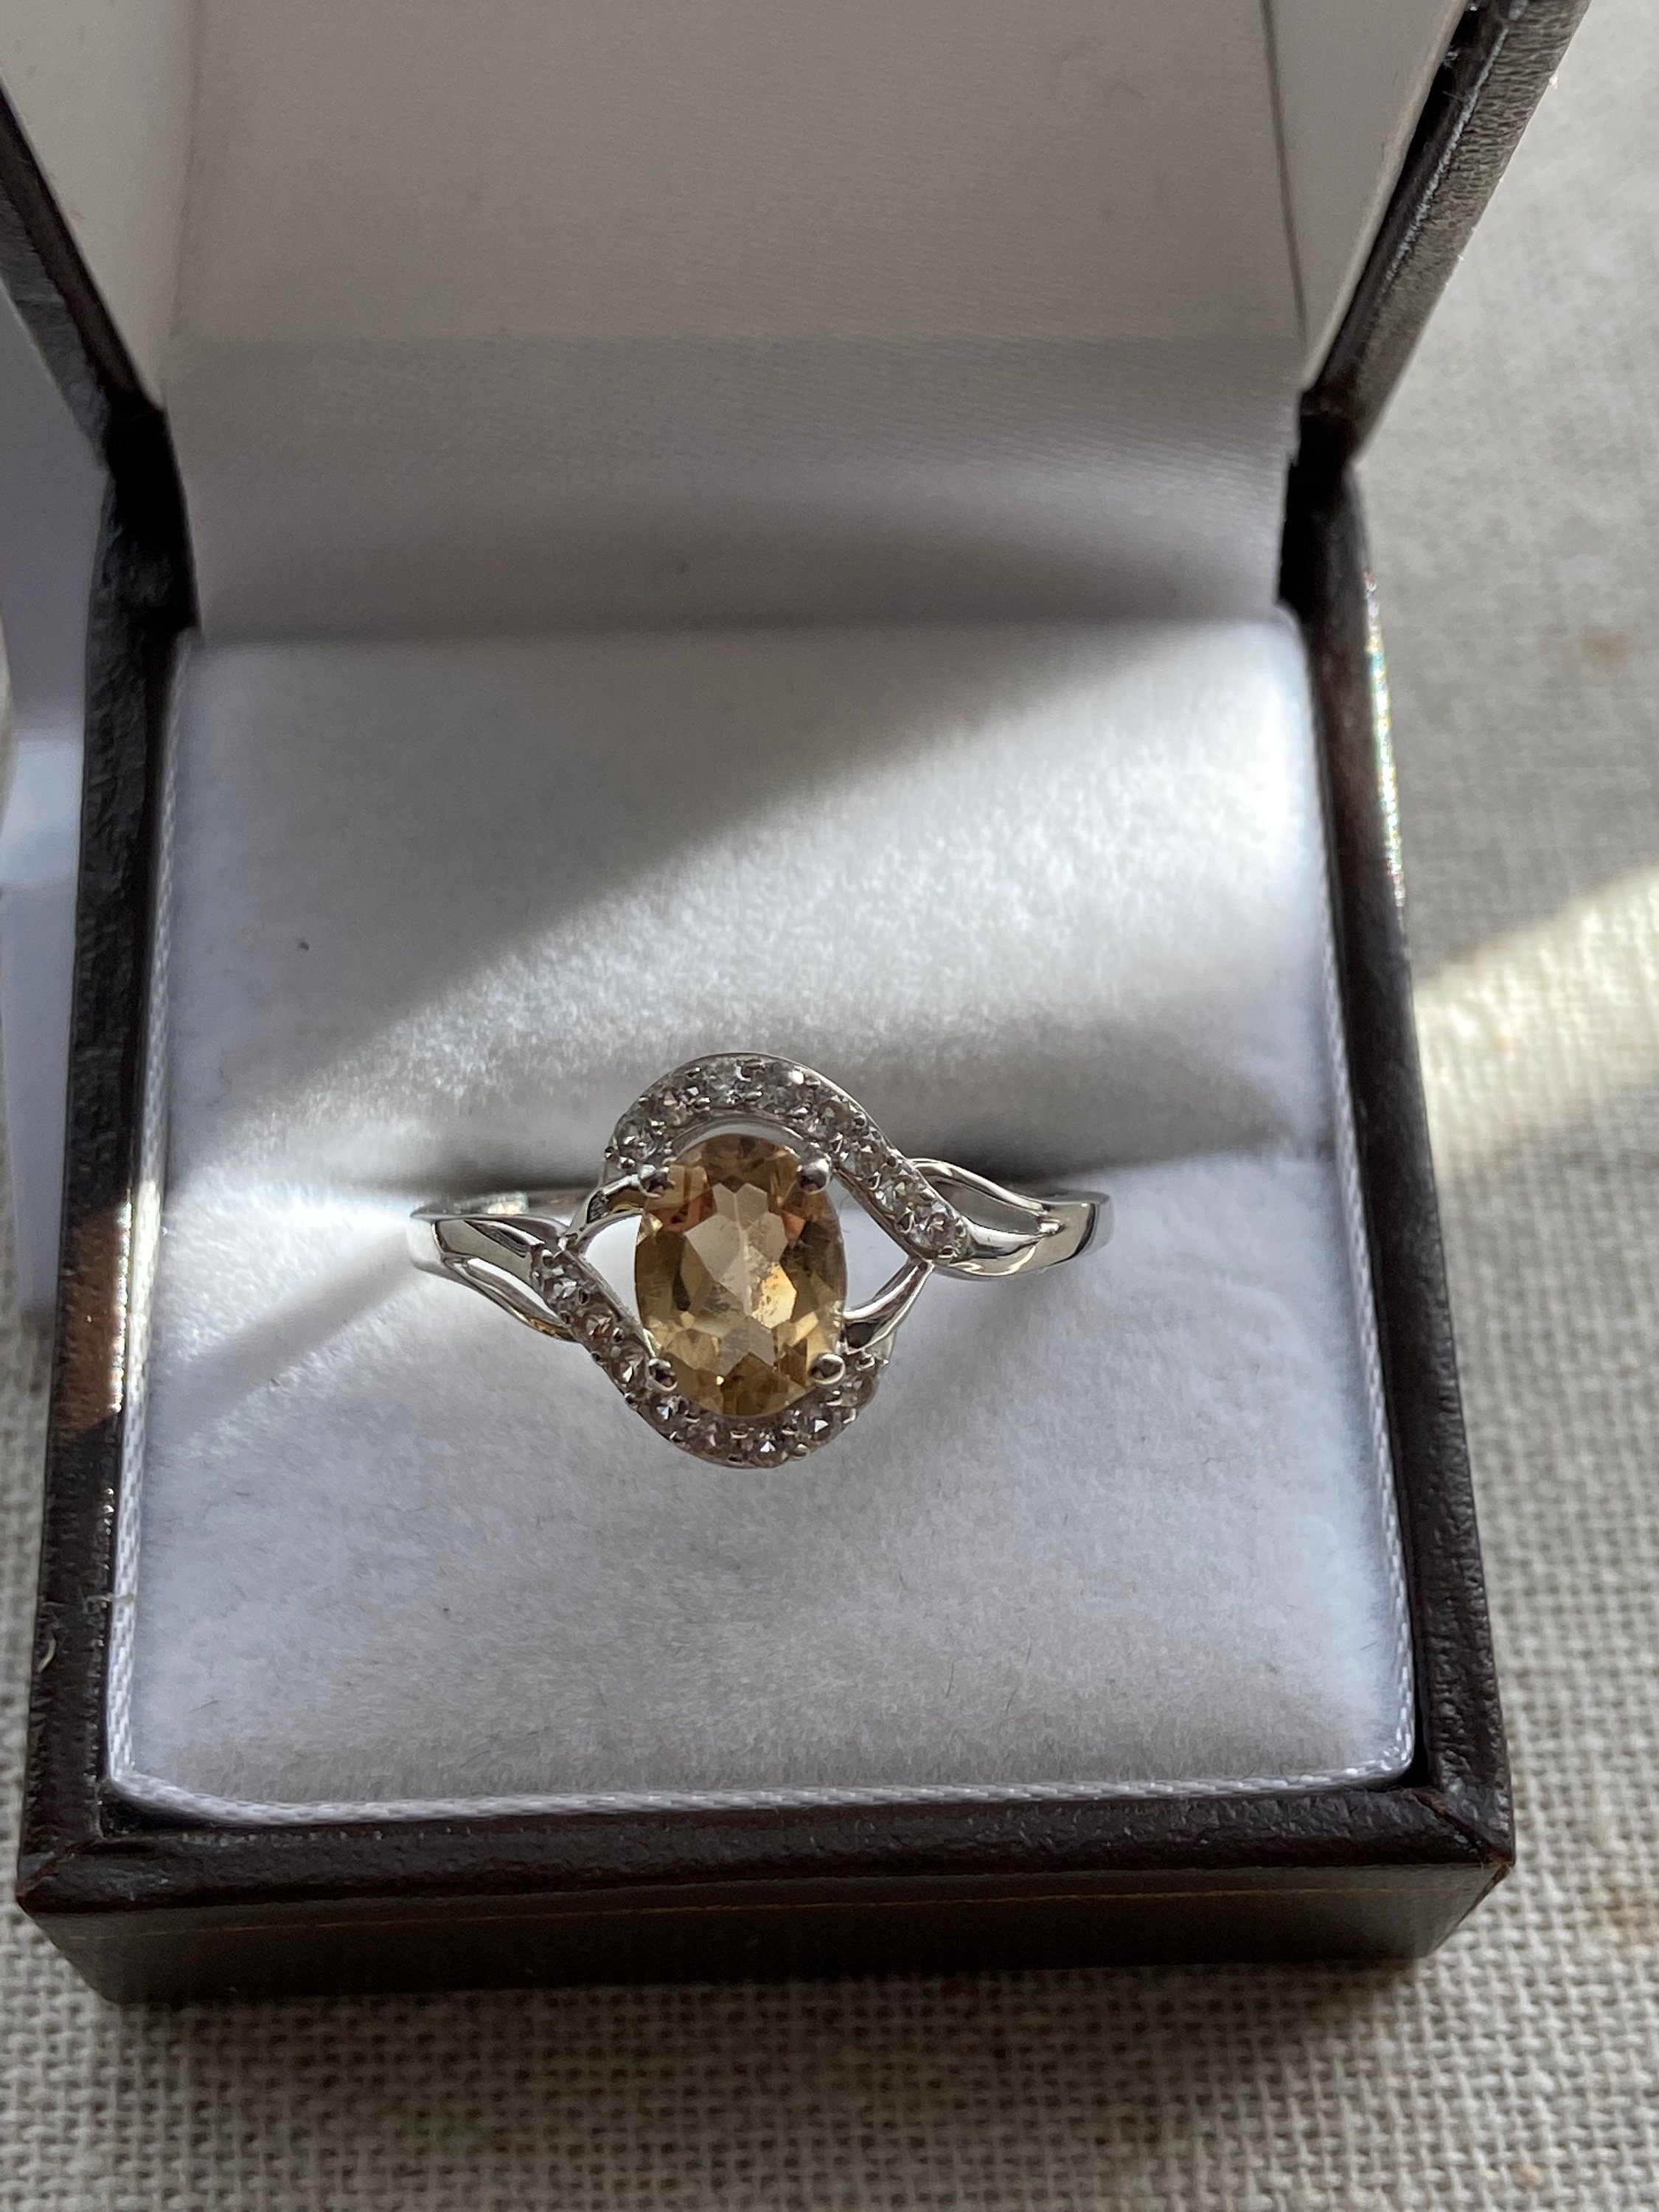 UK Sizes S T US Size  9 9.5 Beautiful sterling silver rare yellow scapolite & zircon gemstone ring